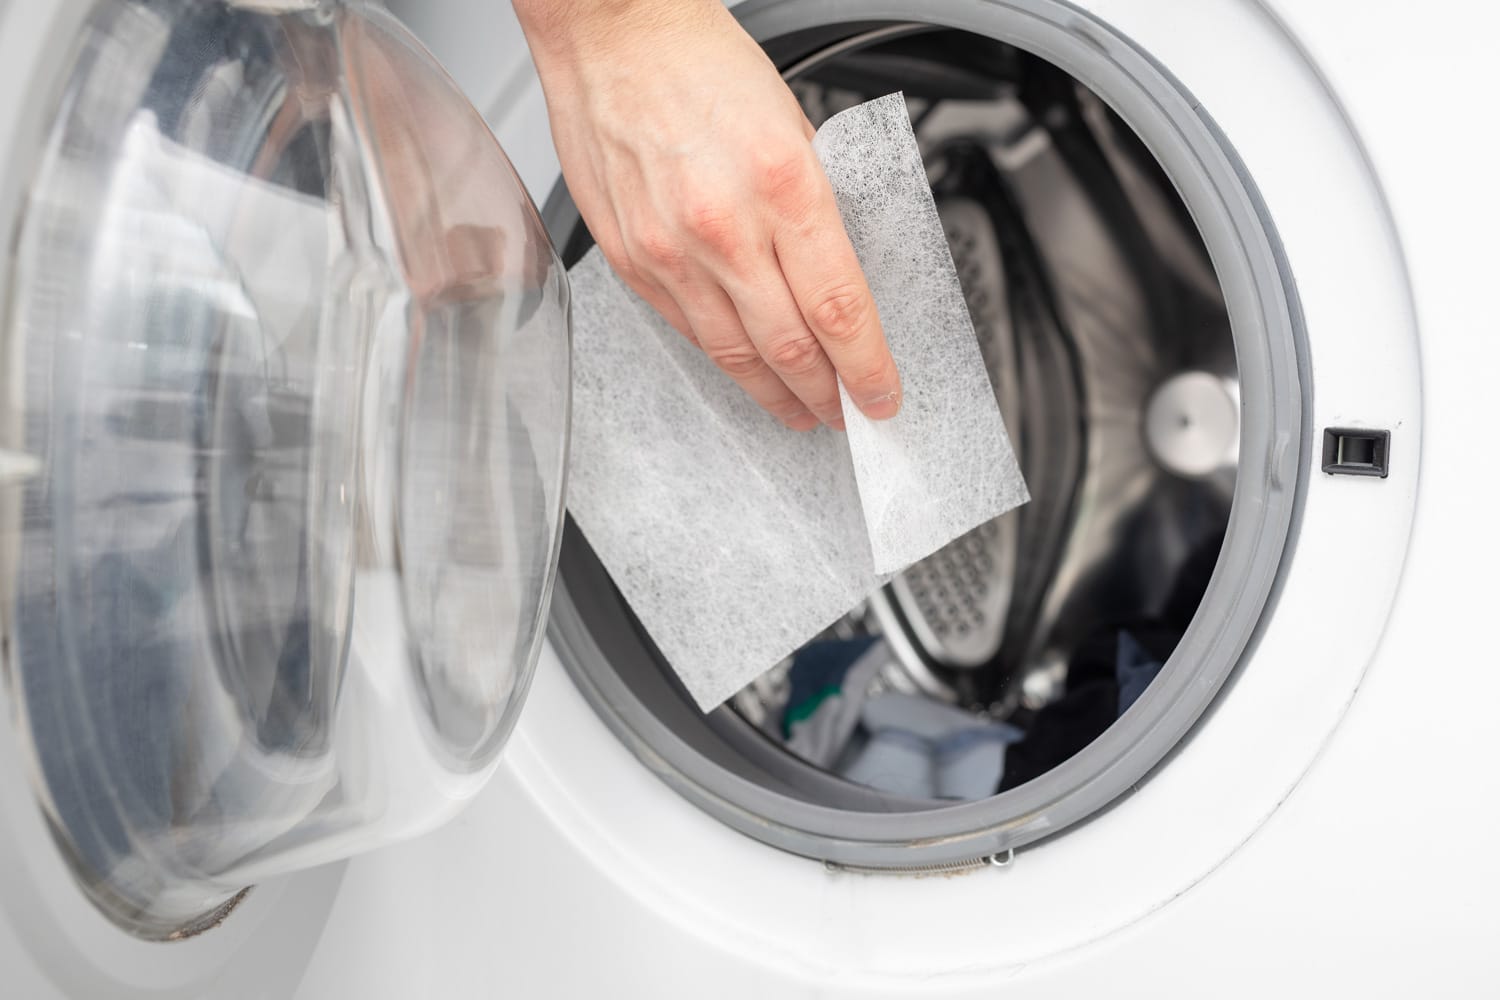 Soft your laundry by dropping dryer sheets into your dryer